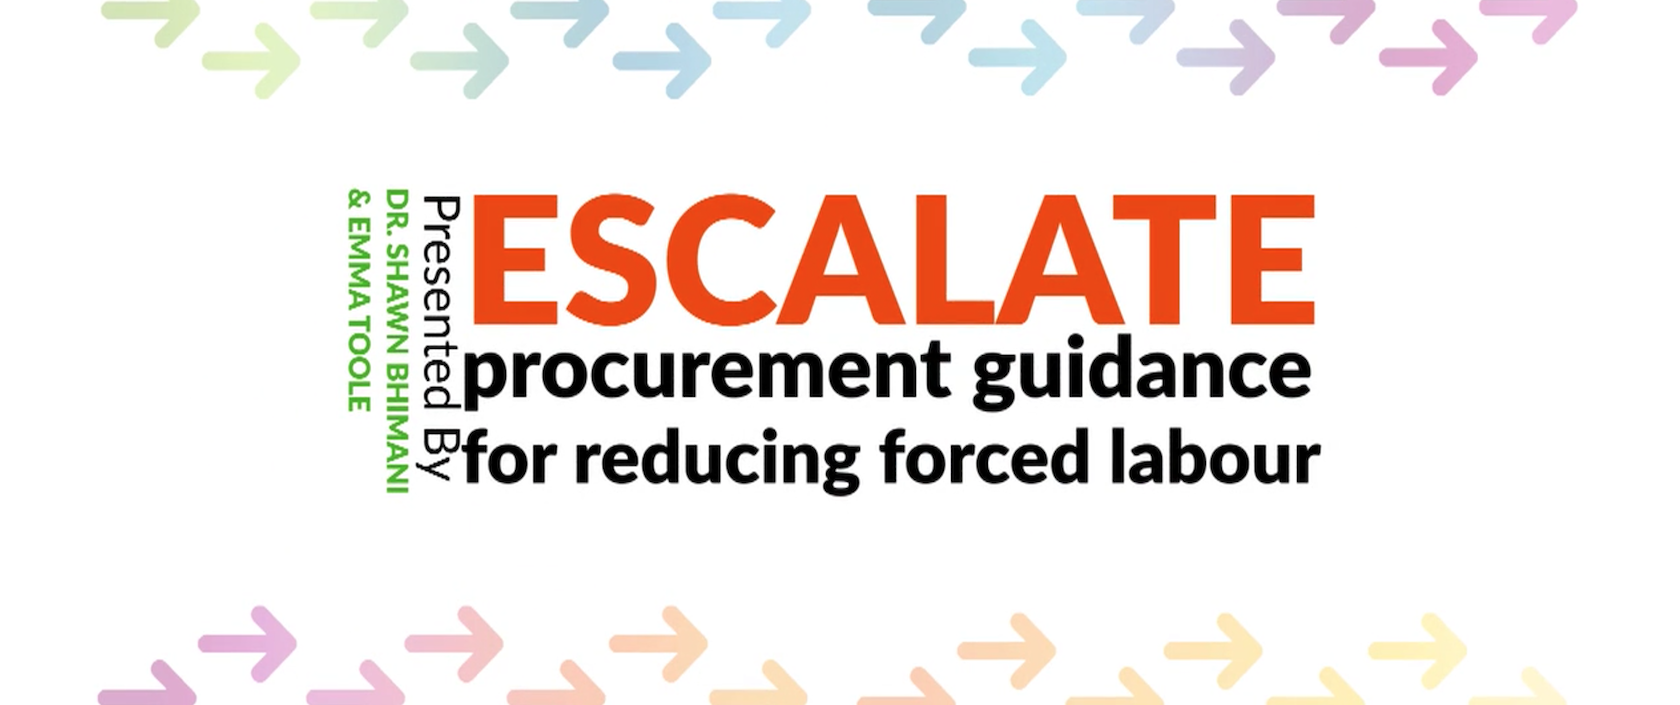 Escalate: procurement guidance for reducing forced labor